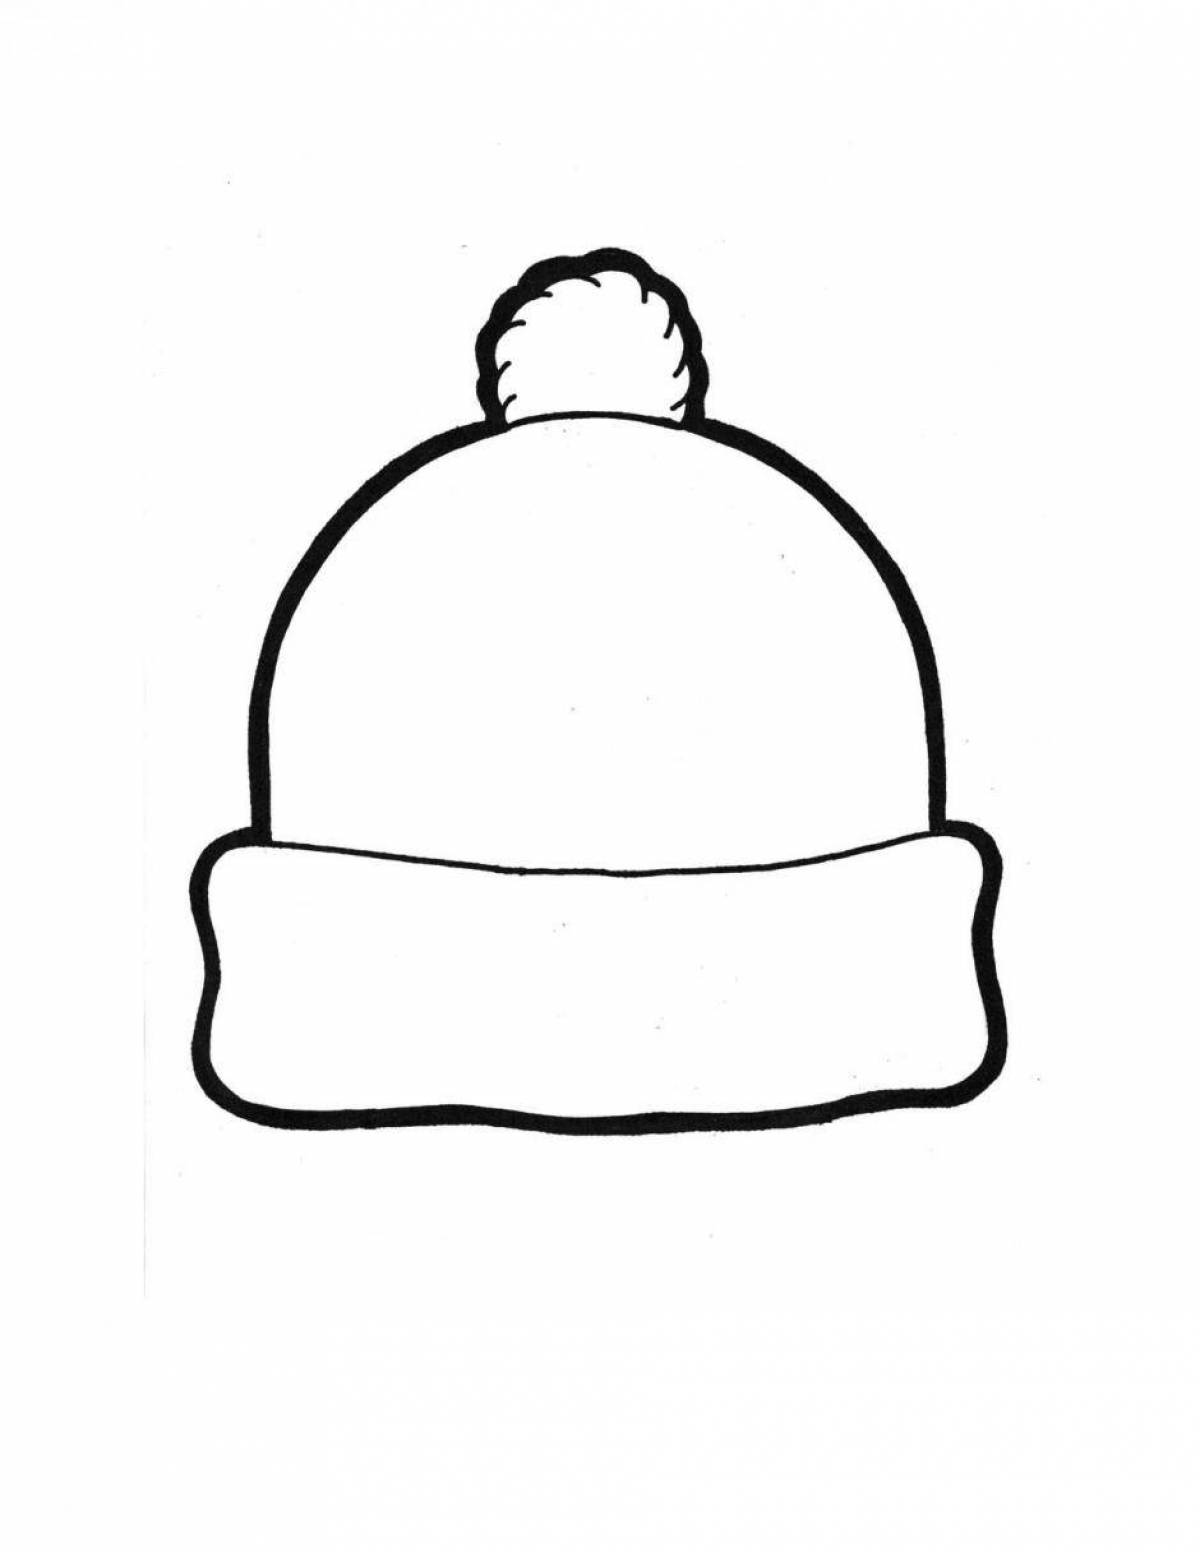 Amazing coloring pages with caps for kids 2-3 years old